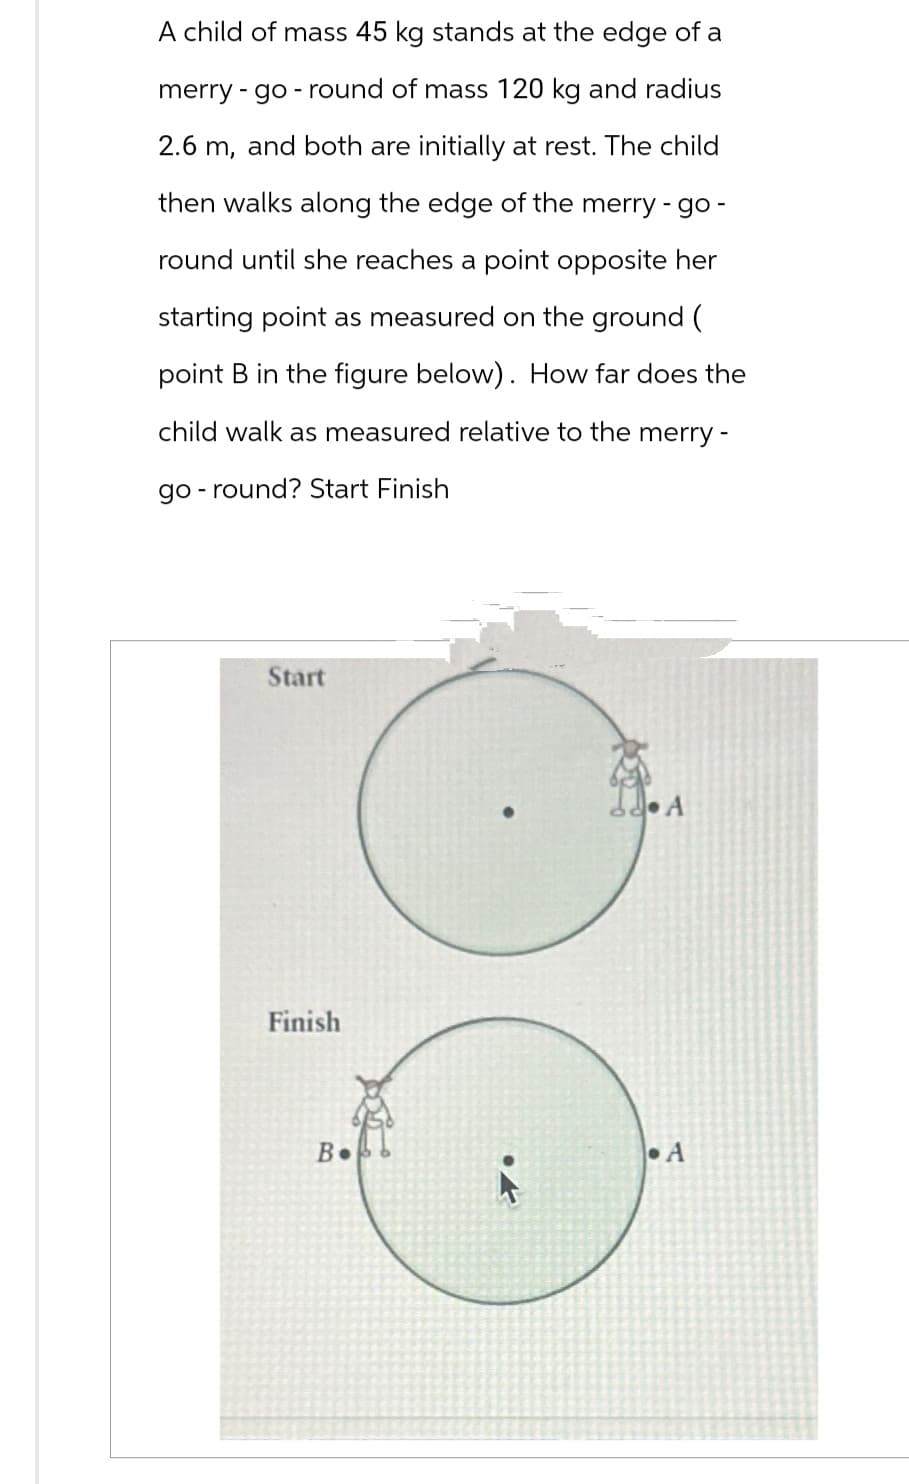 A child of mass 45 kg stands at the edge of a
merry-go-round of mass 120 kg and radius
2.6 m, and both are initially at rest. The child
then walks along the edge of the merry-go-
round until she reaches a point opposite her
starting point as measured on the ground (
point B in the figure below). How far does the
child walk as measured relative to the merry -
go-round? Start Finish
Start
Finish
В.
3.₁
СА